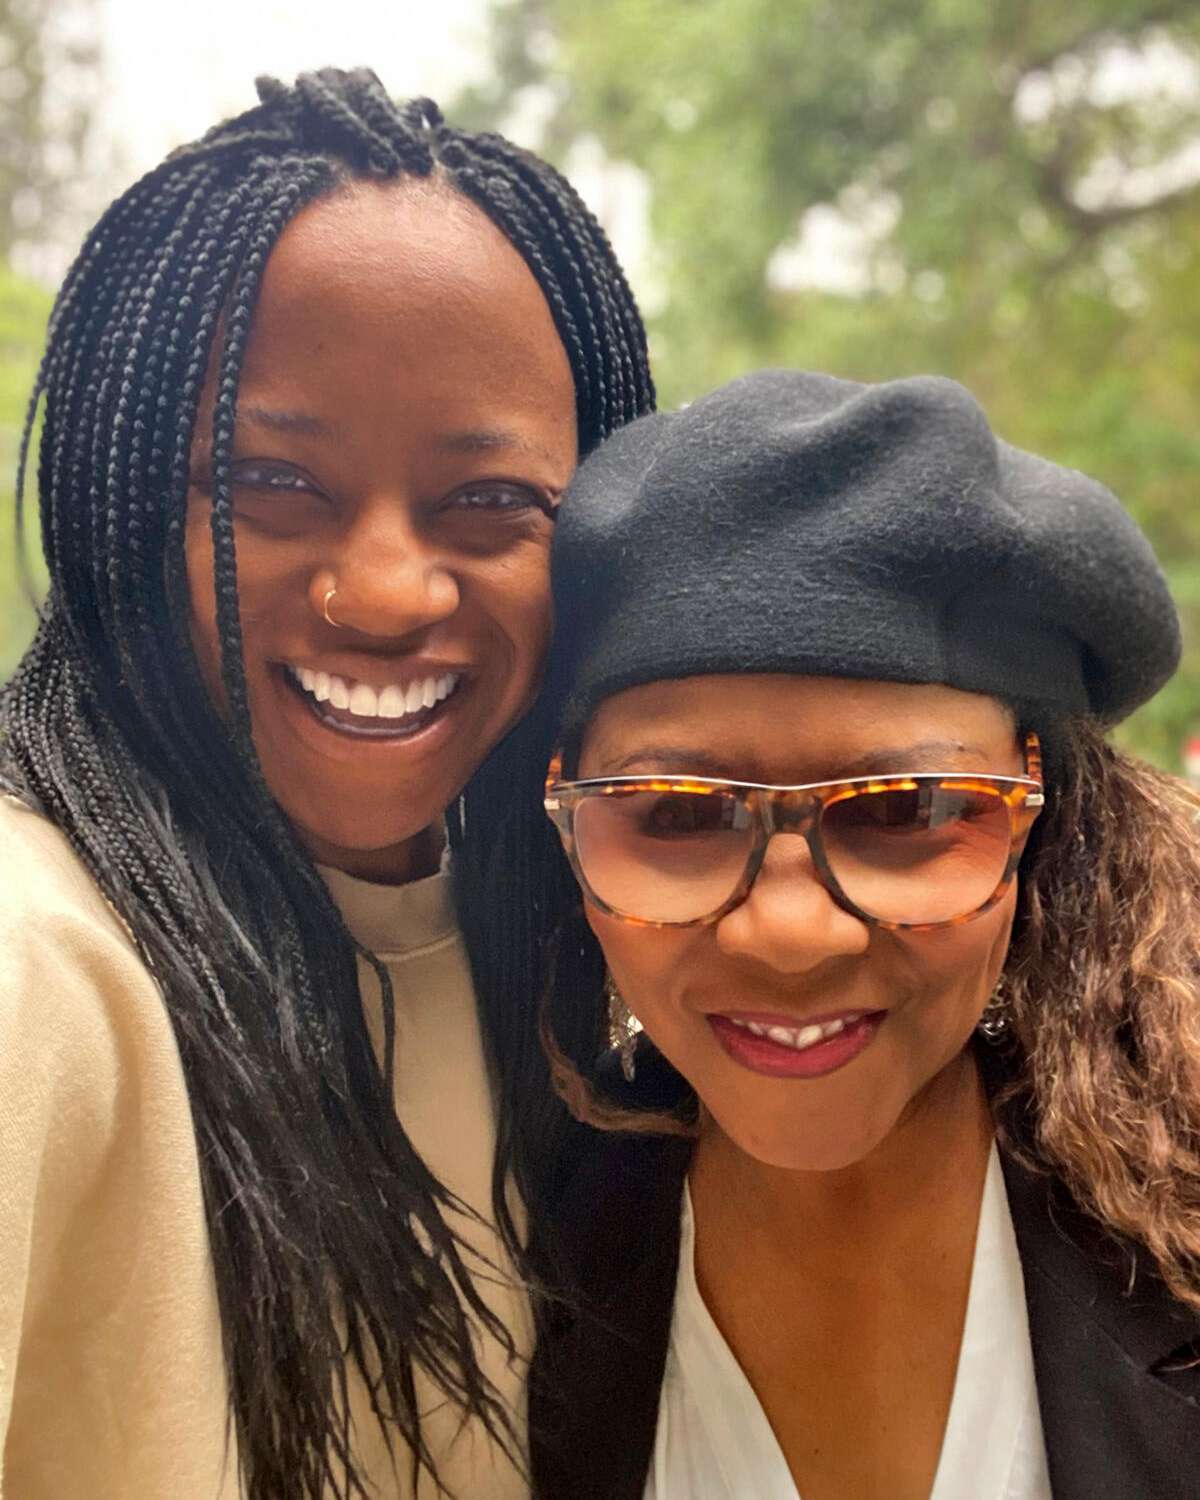 Osayi Endolyn and her aunt, Patrice Rushen